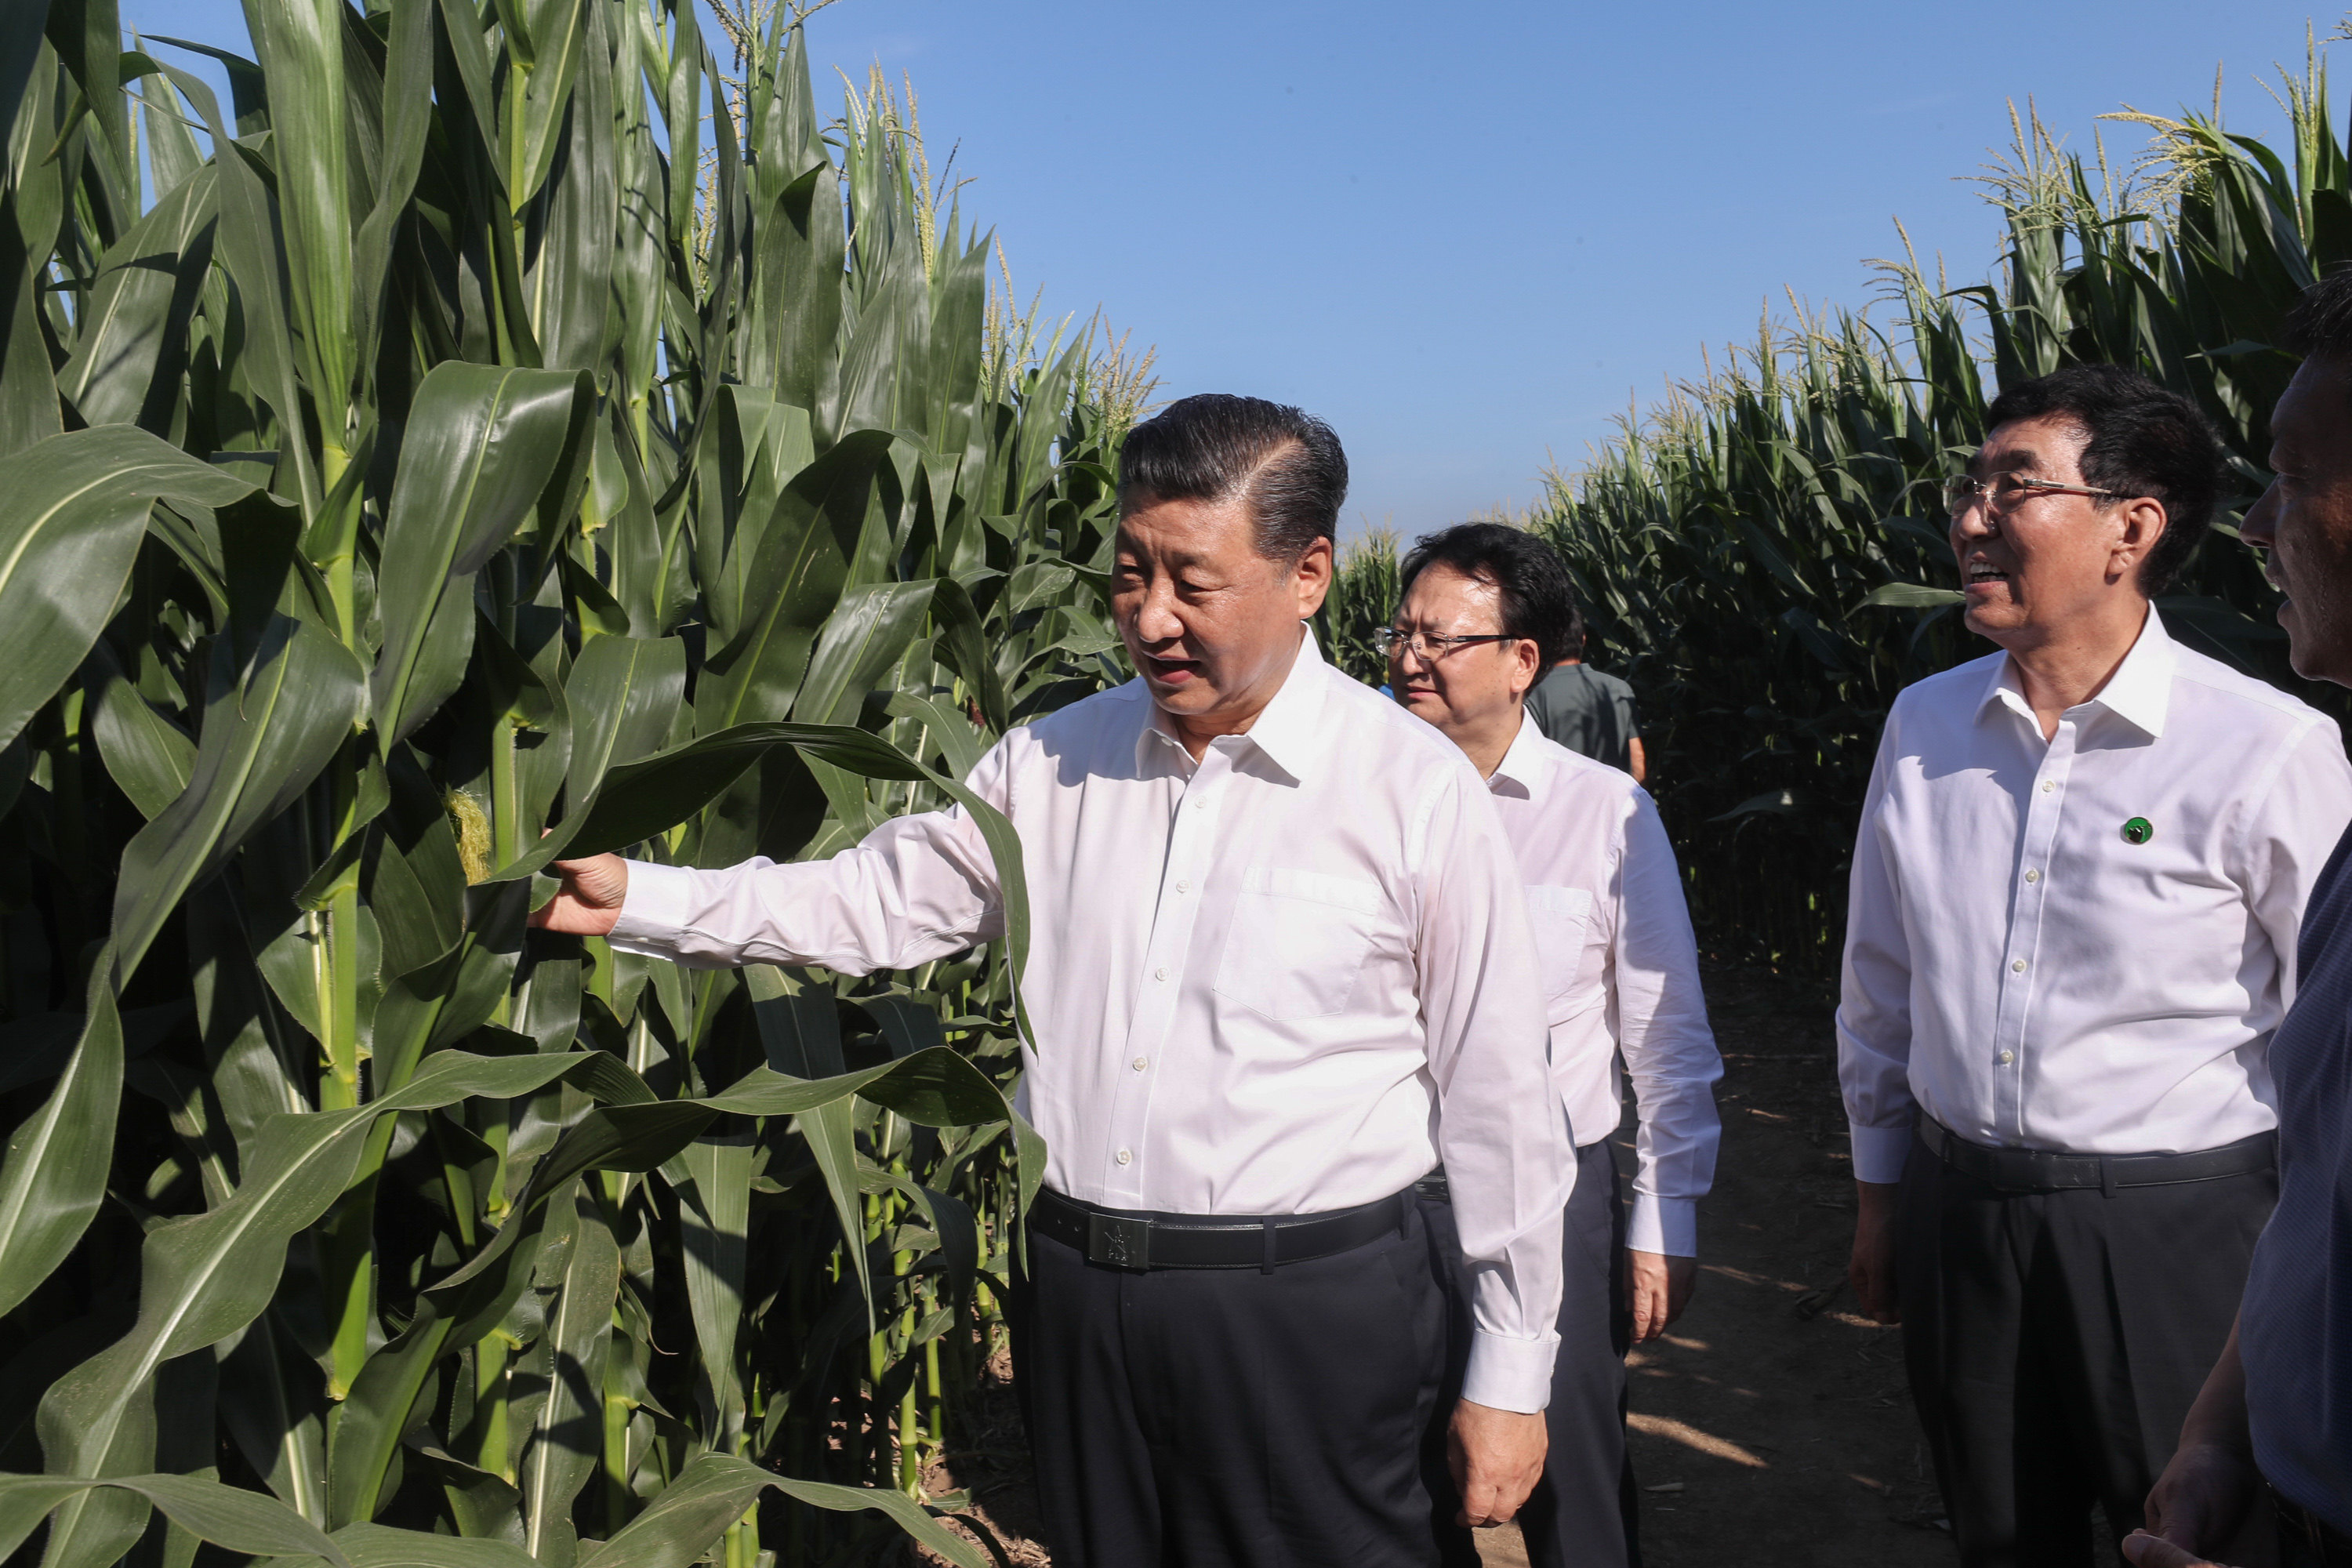 President Xi Jinping, seen here inspecting crops in 2020, has been reiterating for years the importance of food security in China. Photo: Xinhua